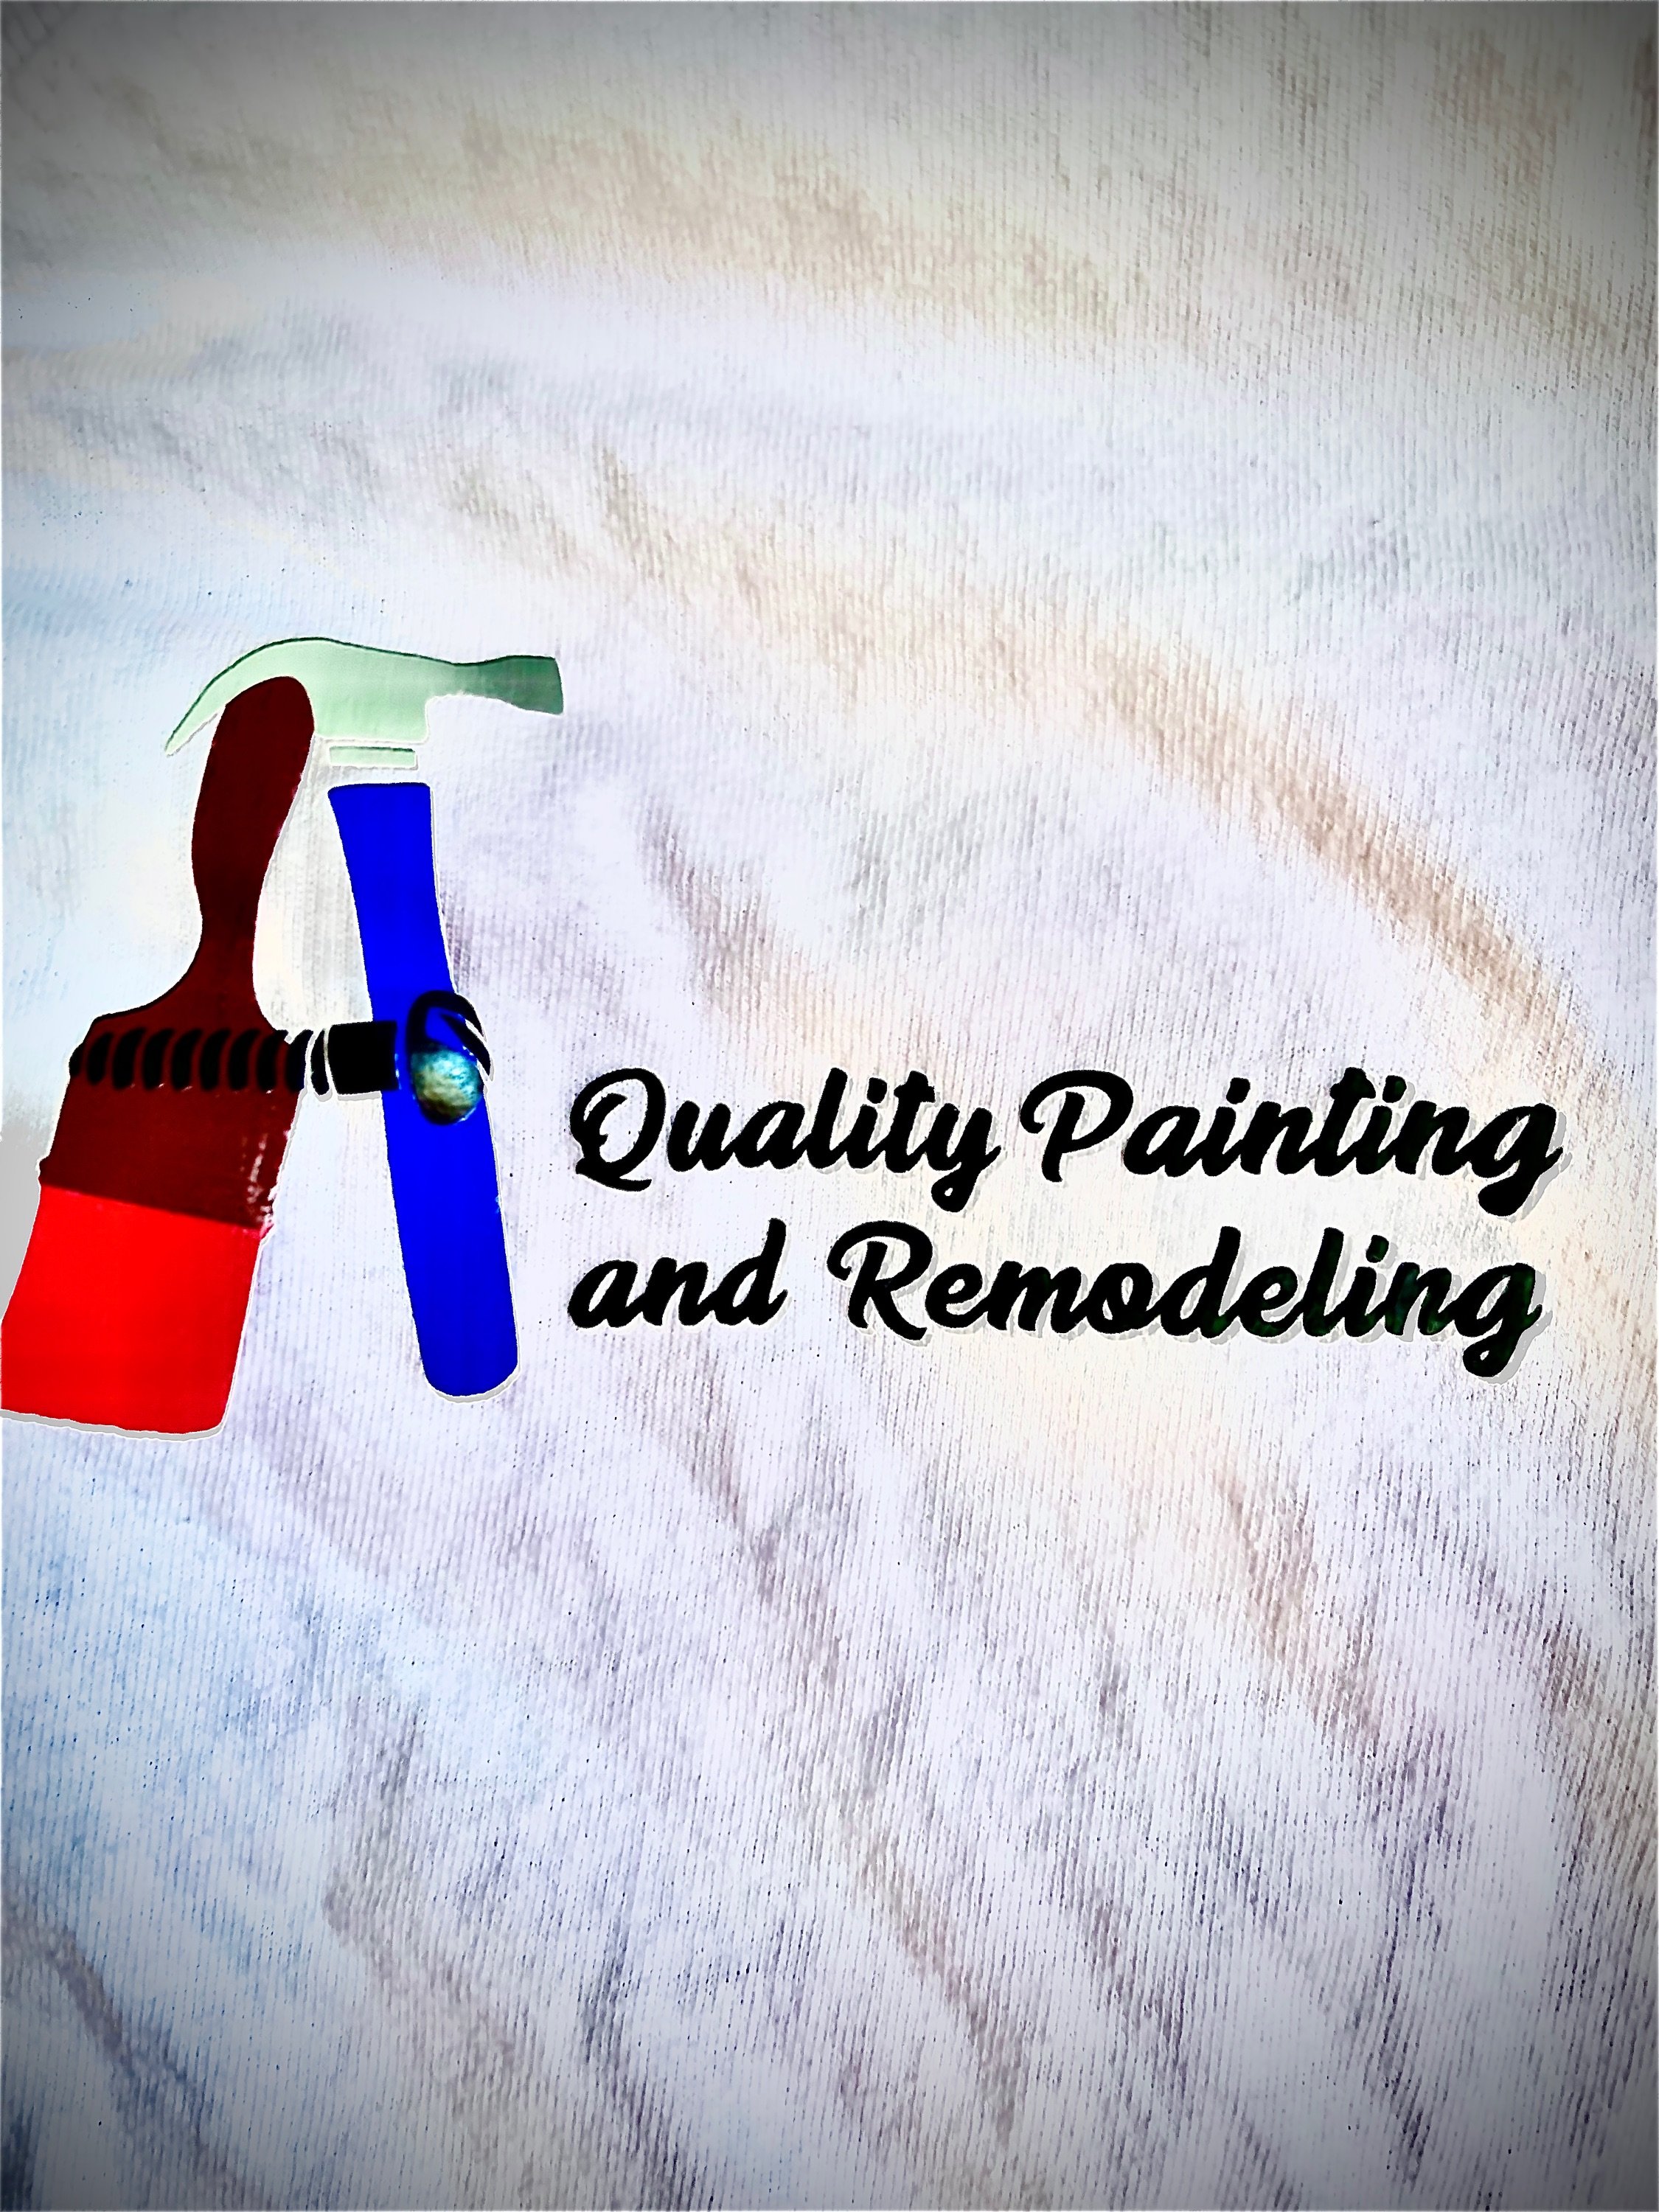 A Quality Painting and Remodeling Logo